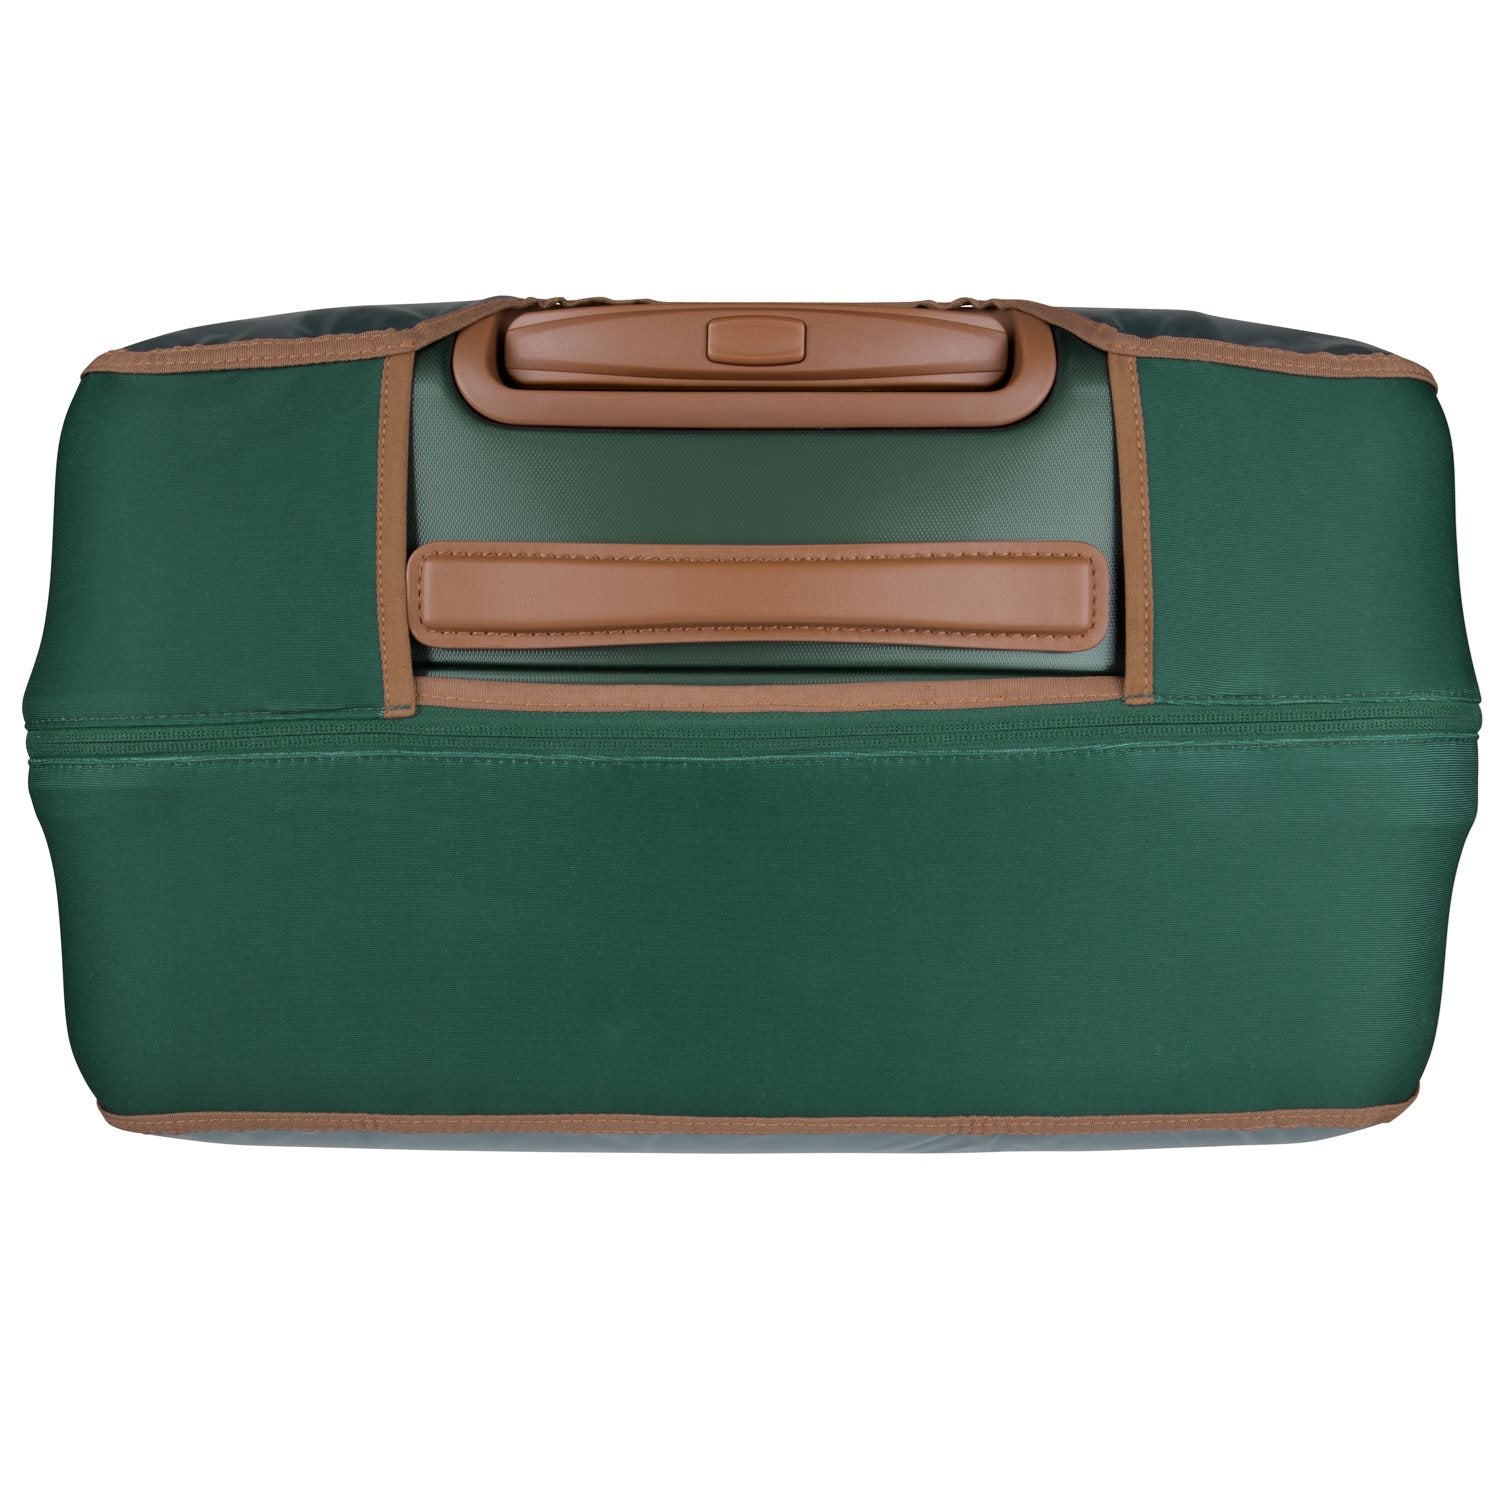 Fab Seventies Classic - Beetle Green - Protection Cover (28 inch)